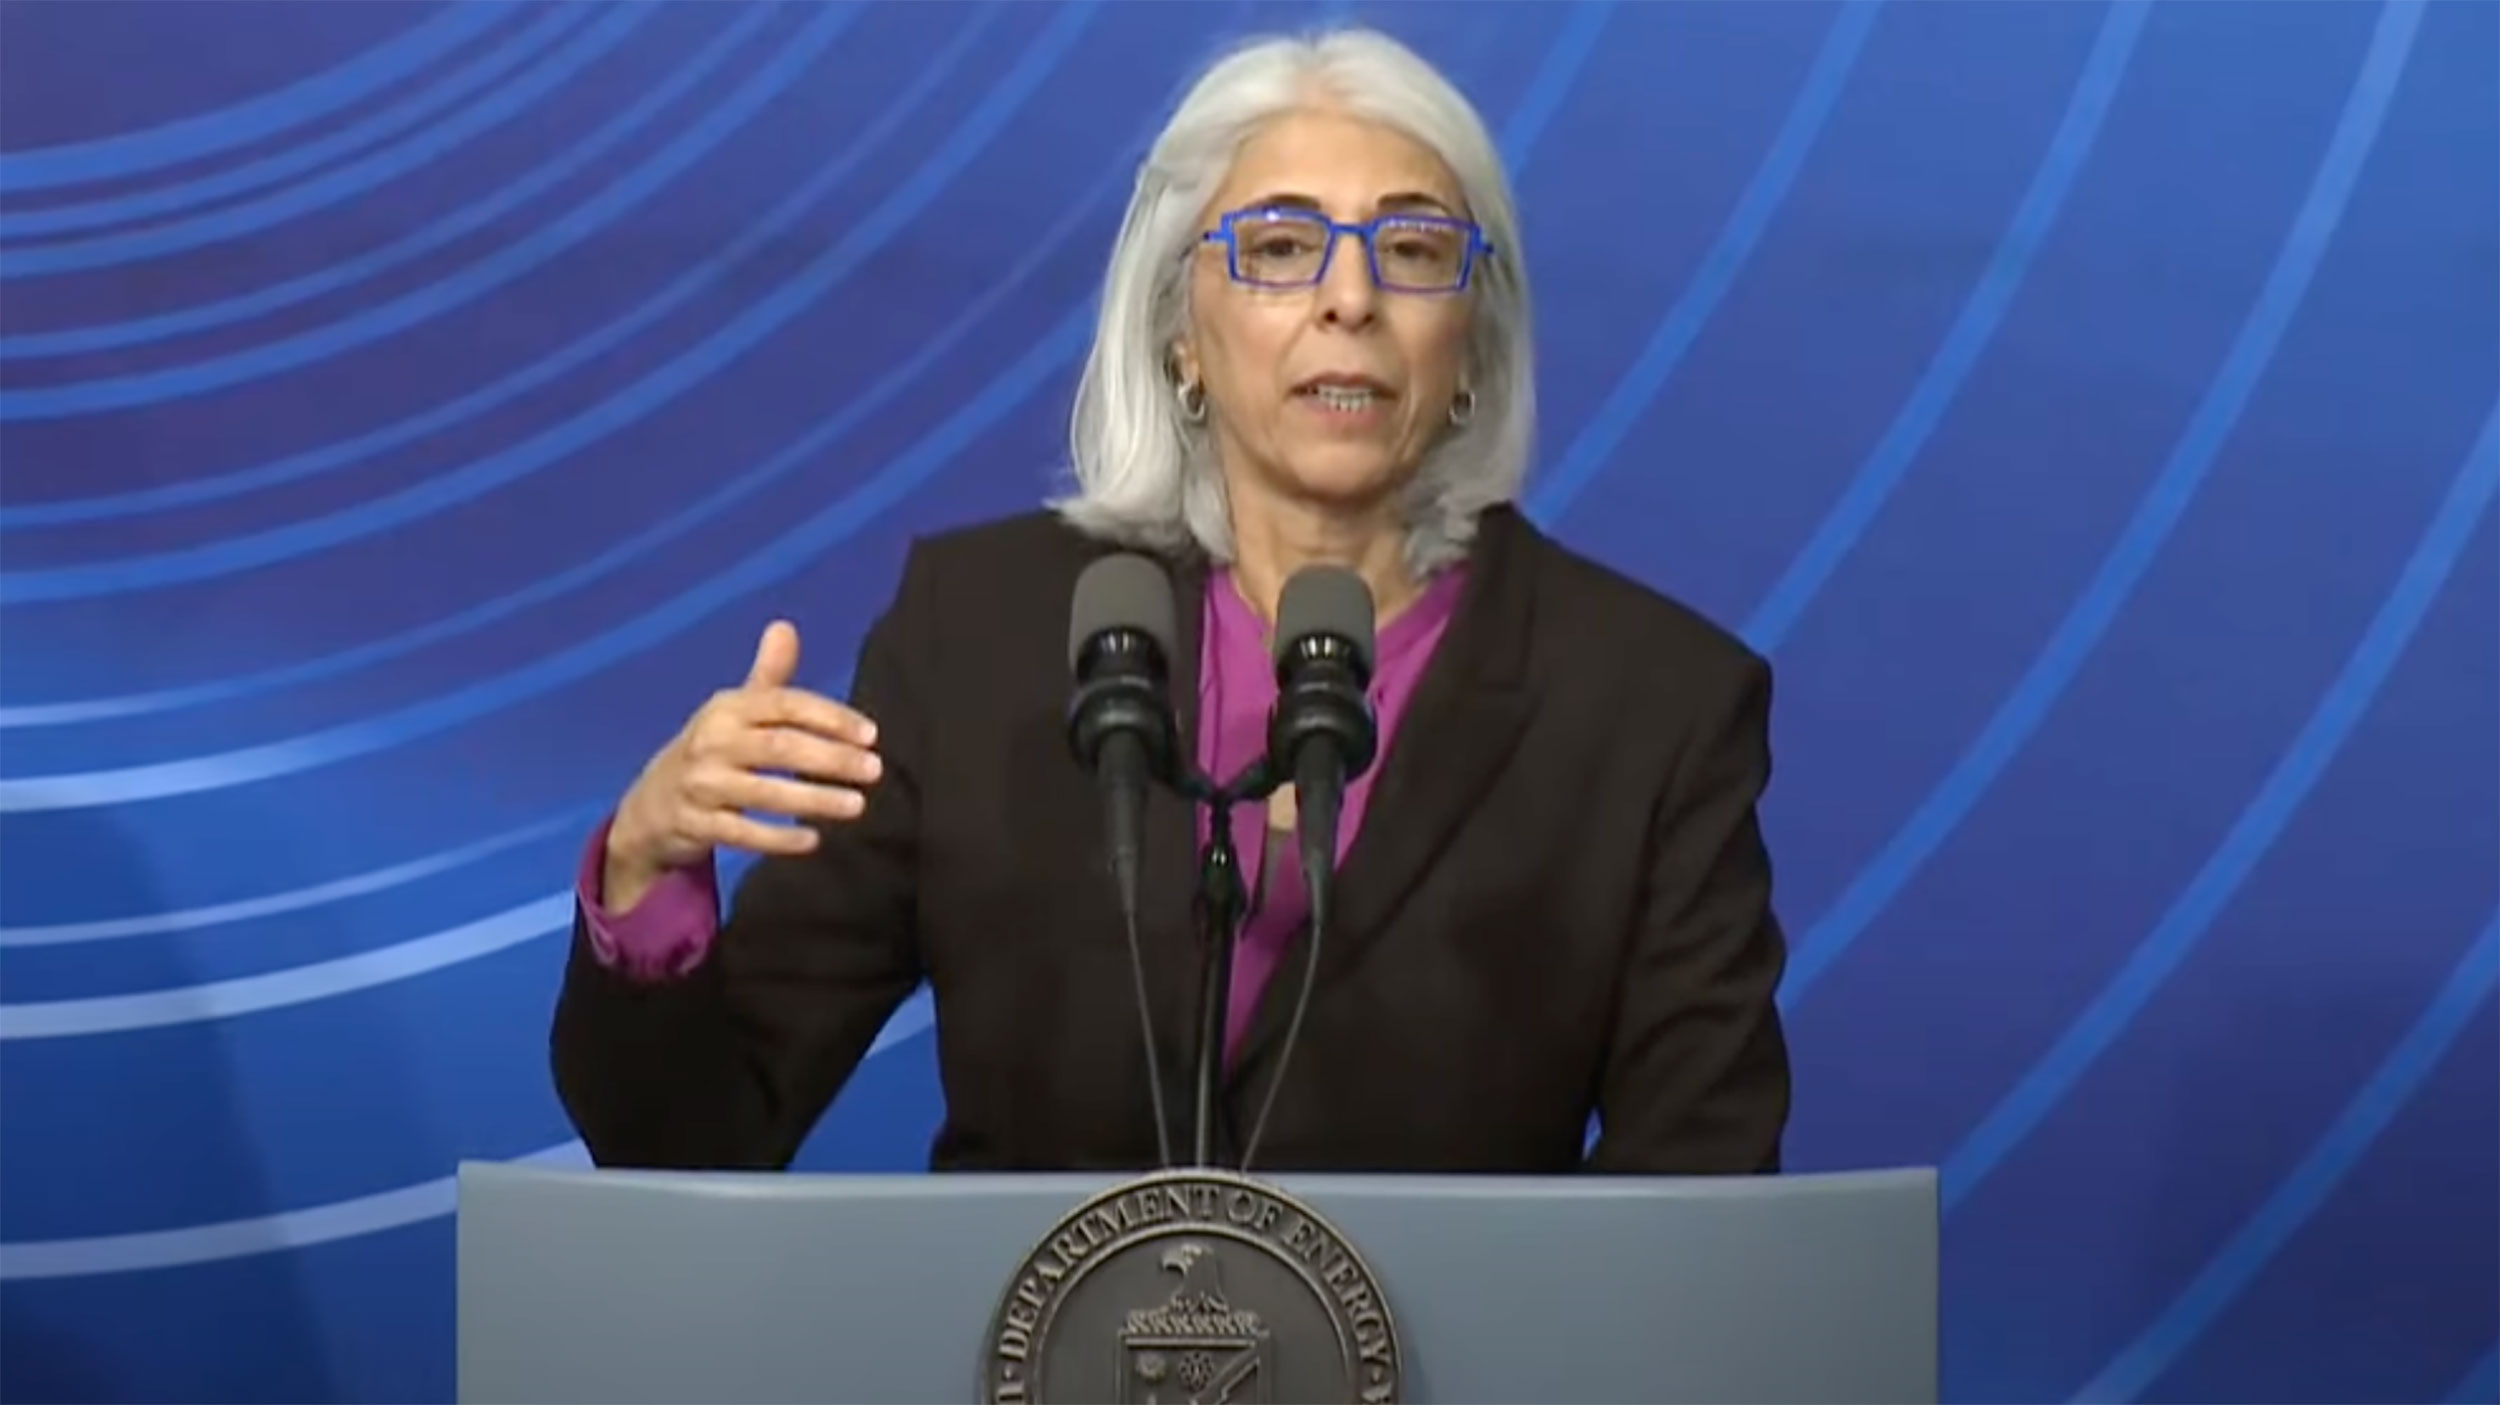 Arathi Prabhakar during a press conference on Tuesday on scientific advances in nuclear fusion.  (US Department of Energy)